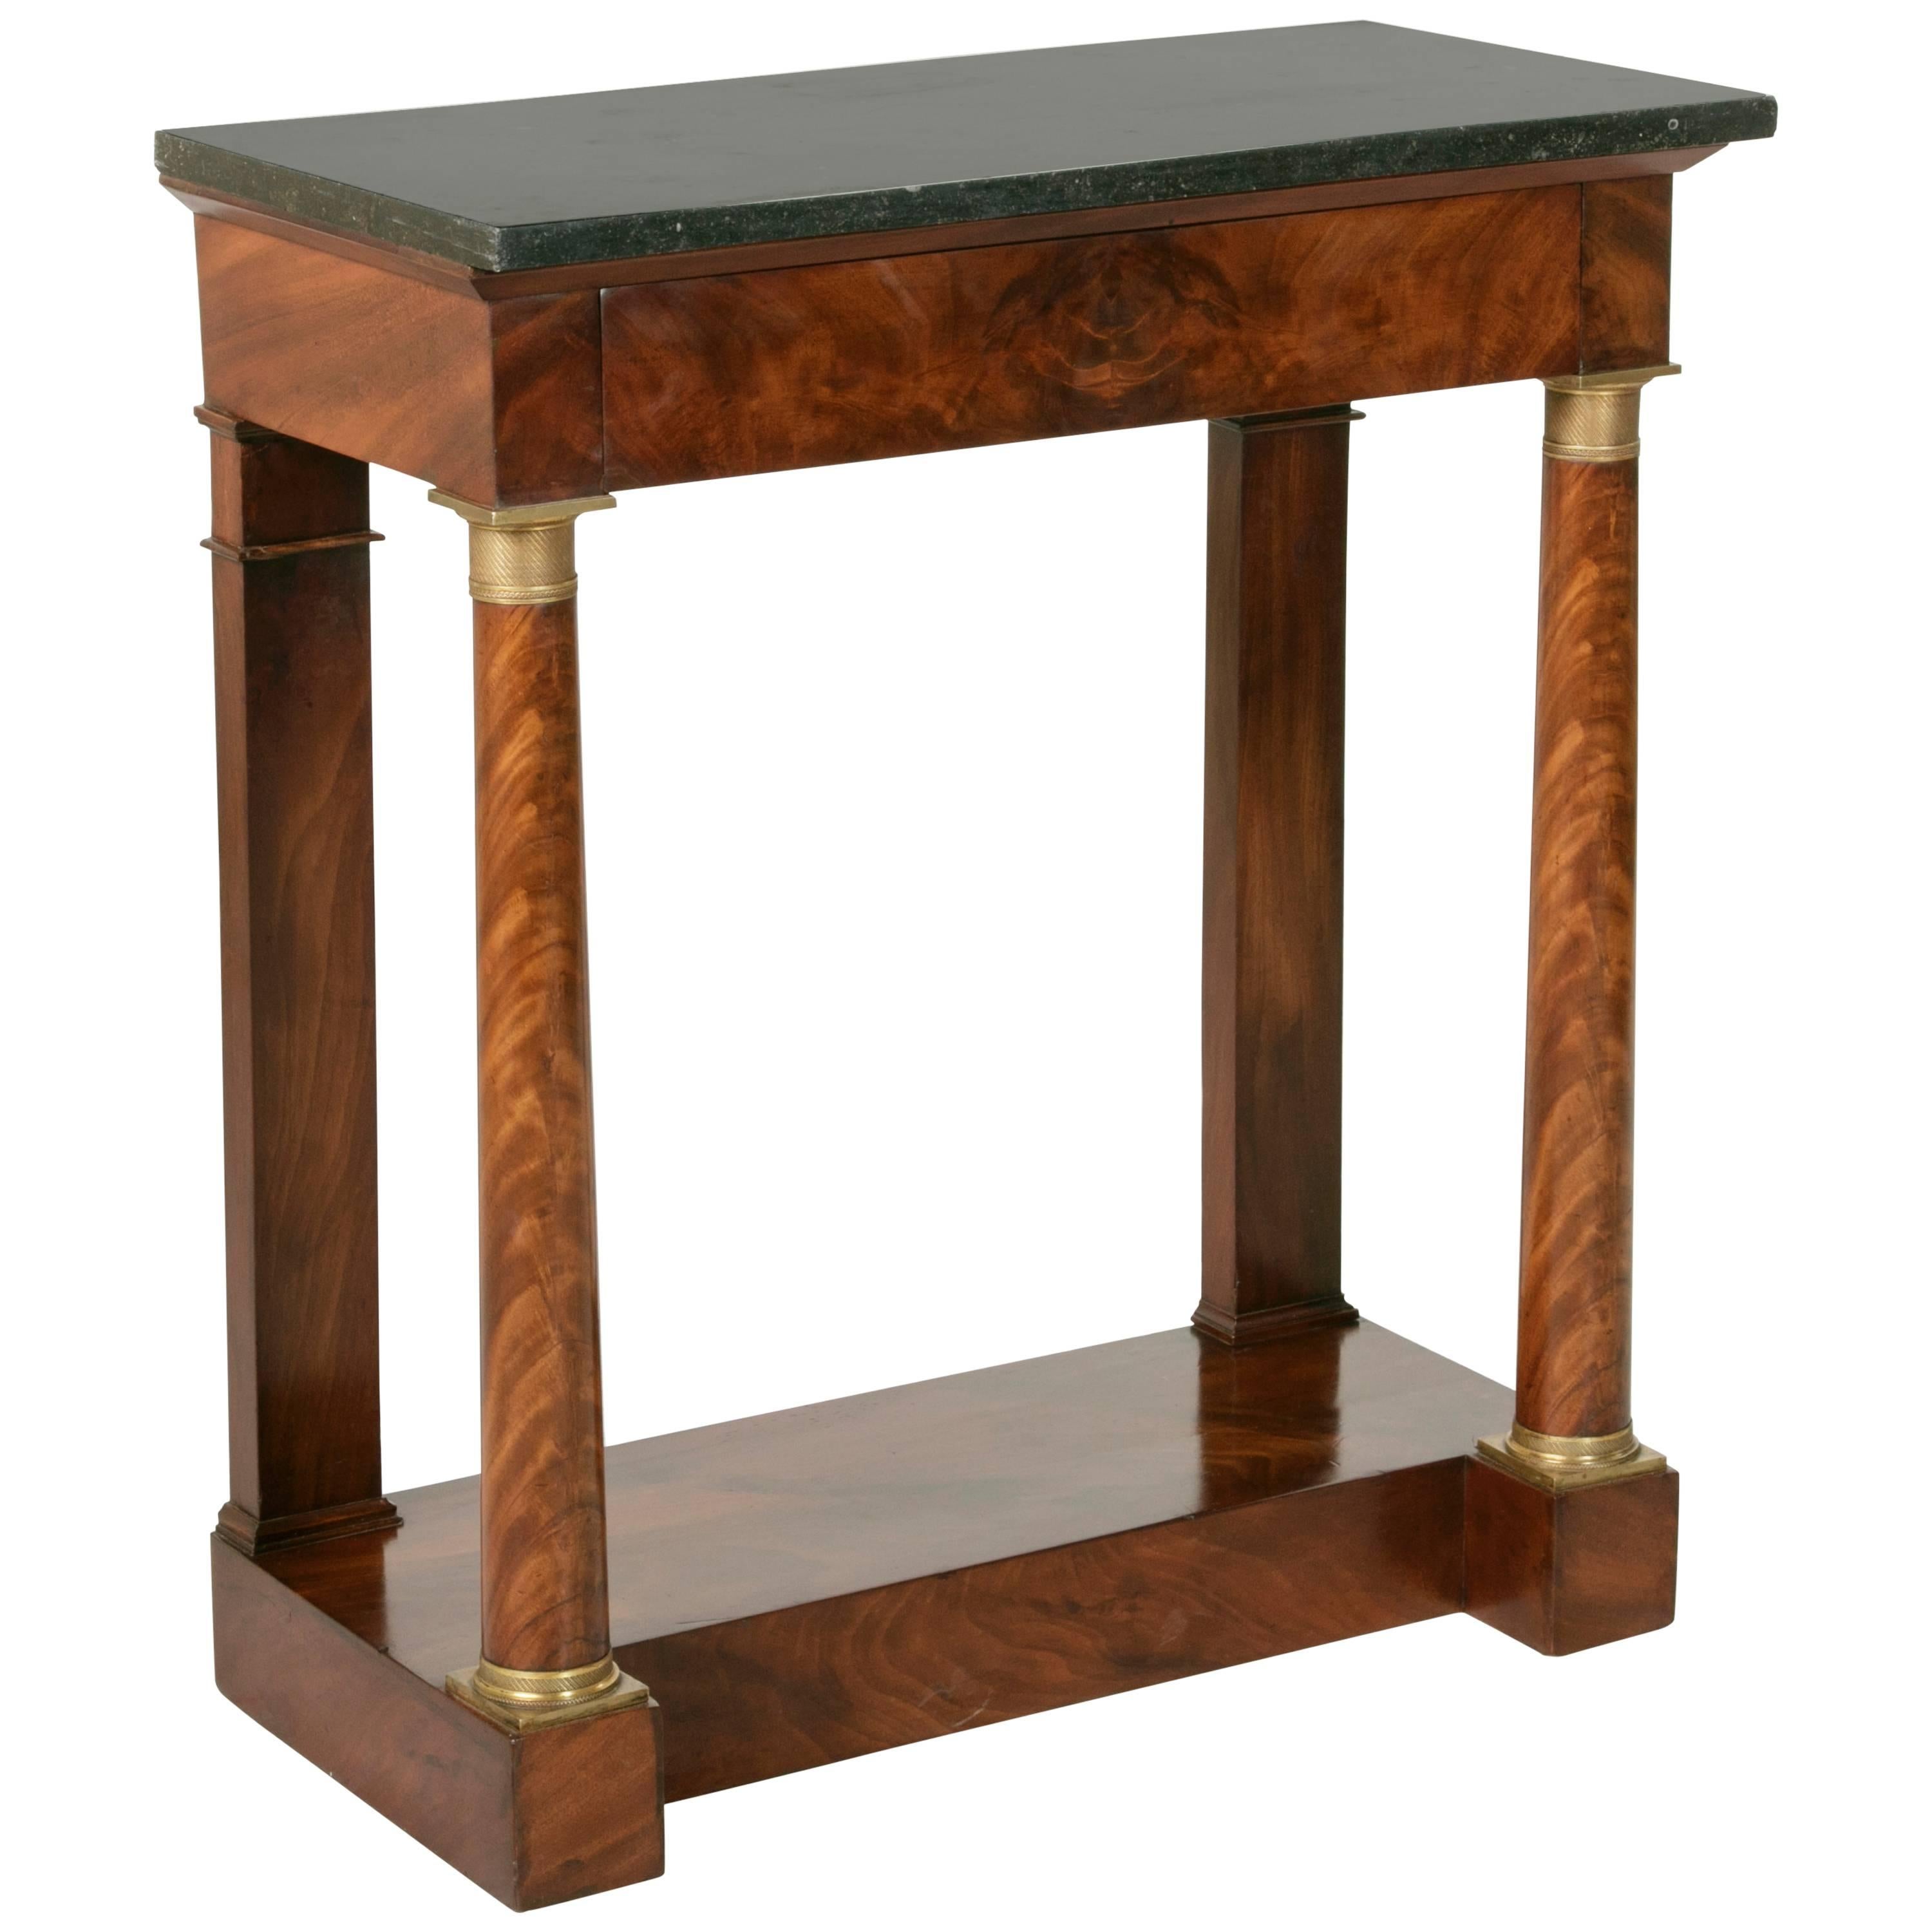 Period Empire Flamed Mahogany Console Table with Columns and Black Marble